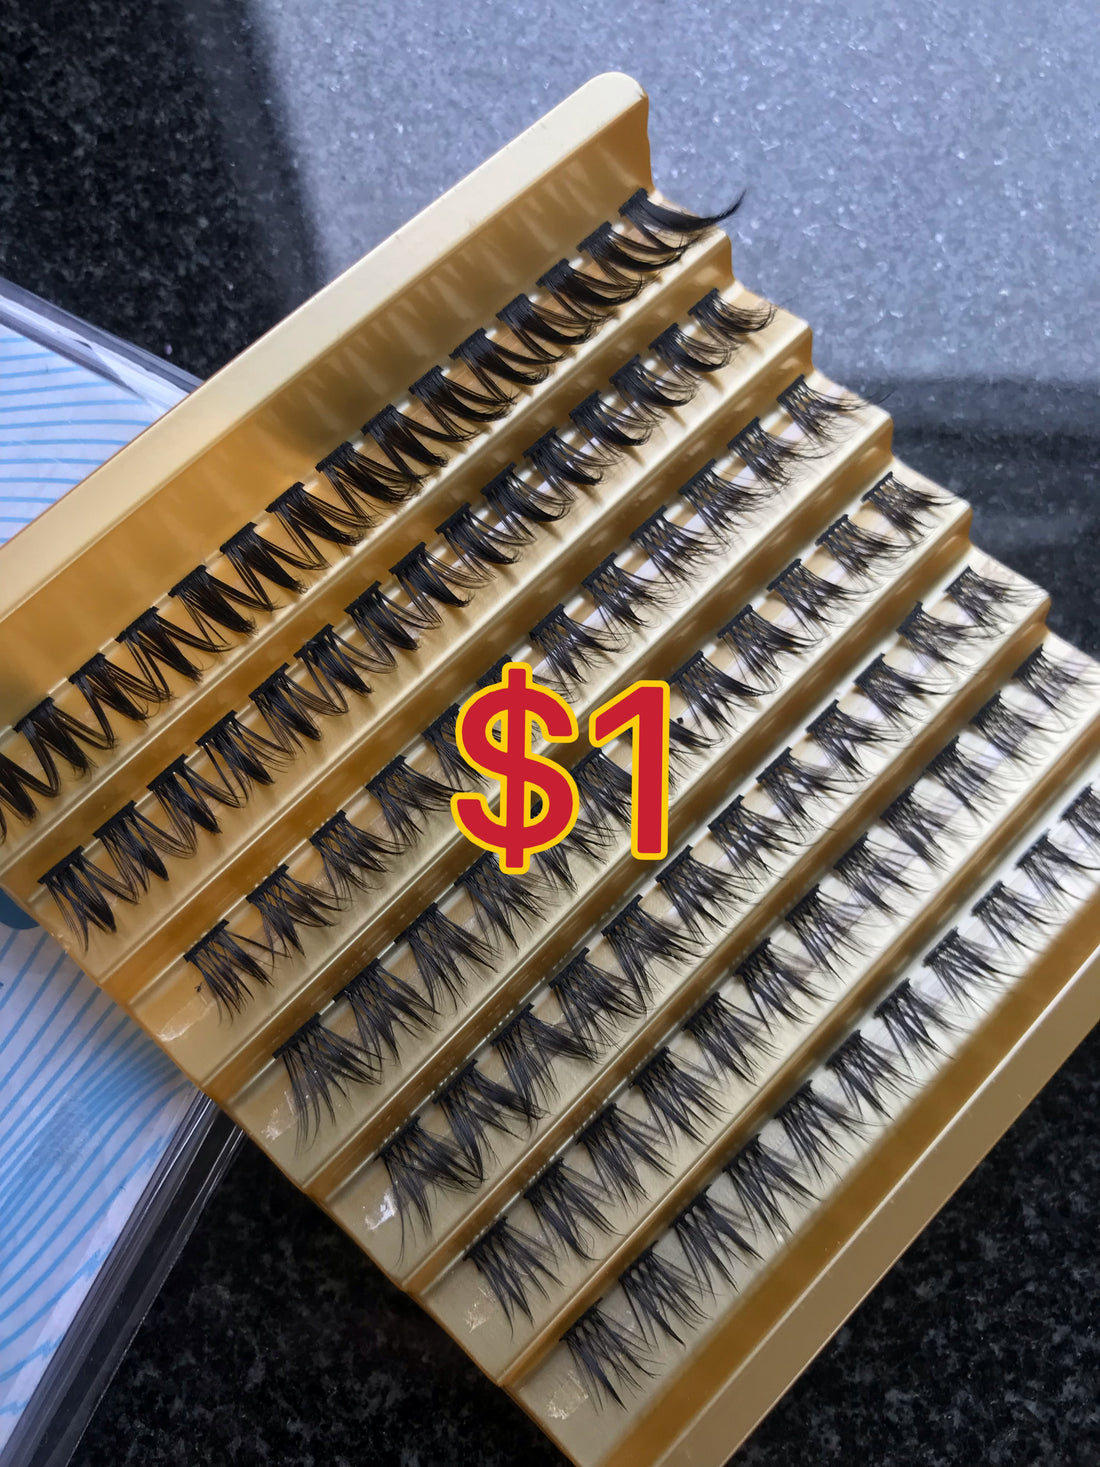 $15.45 for 6 trays lashes